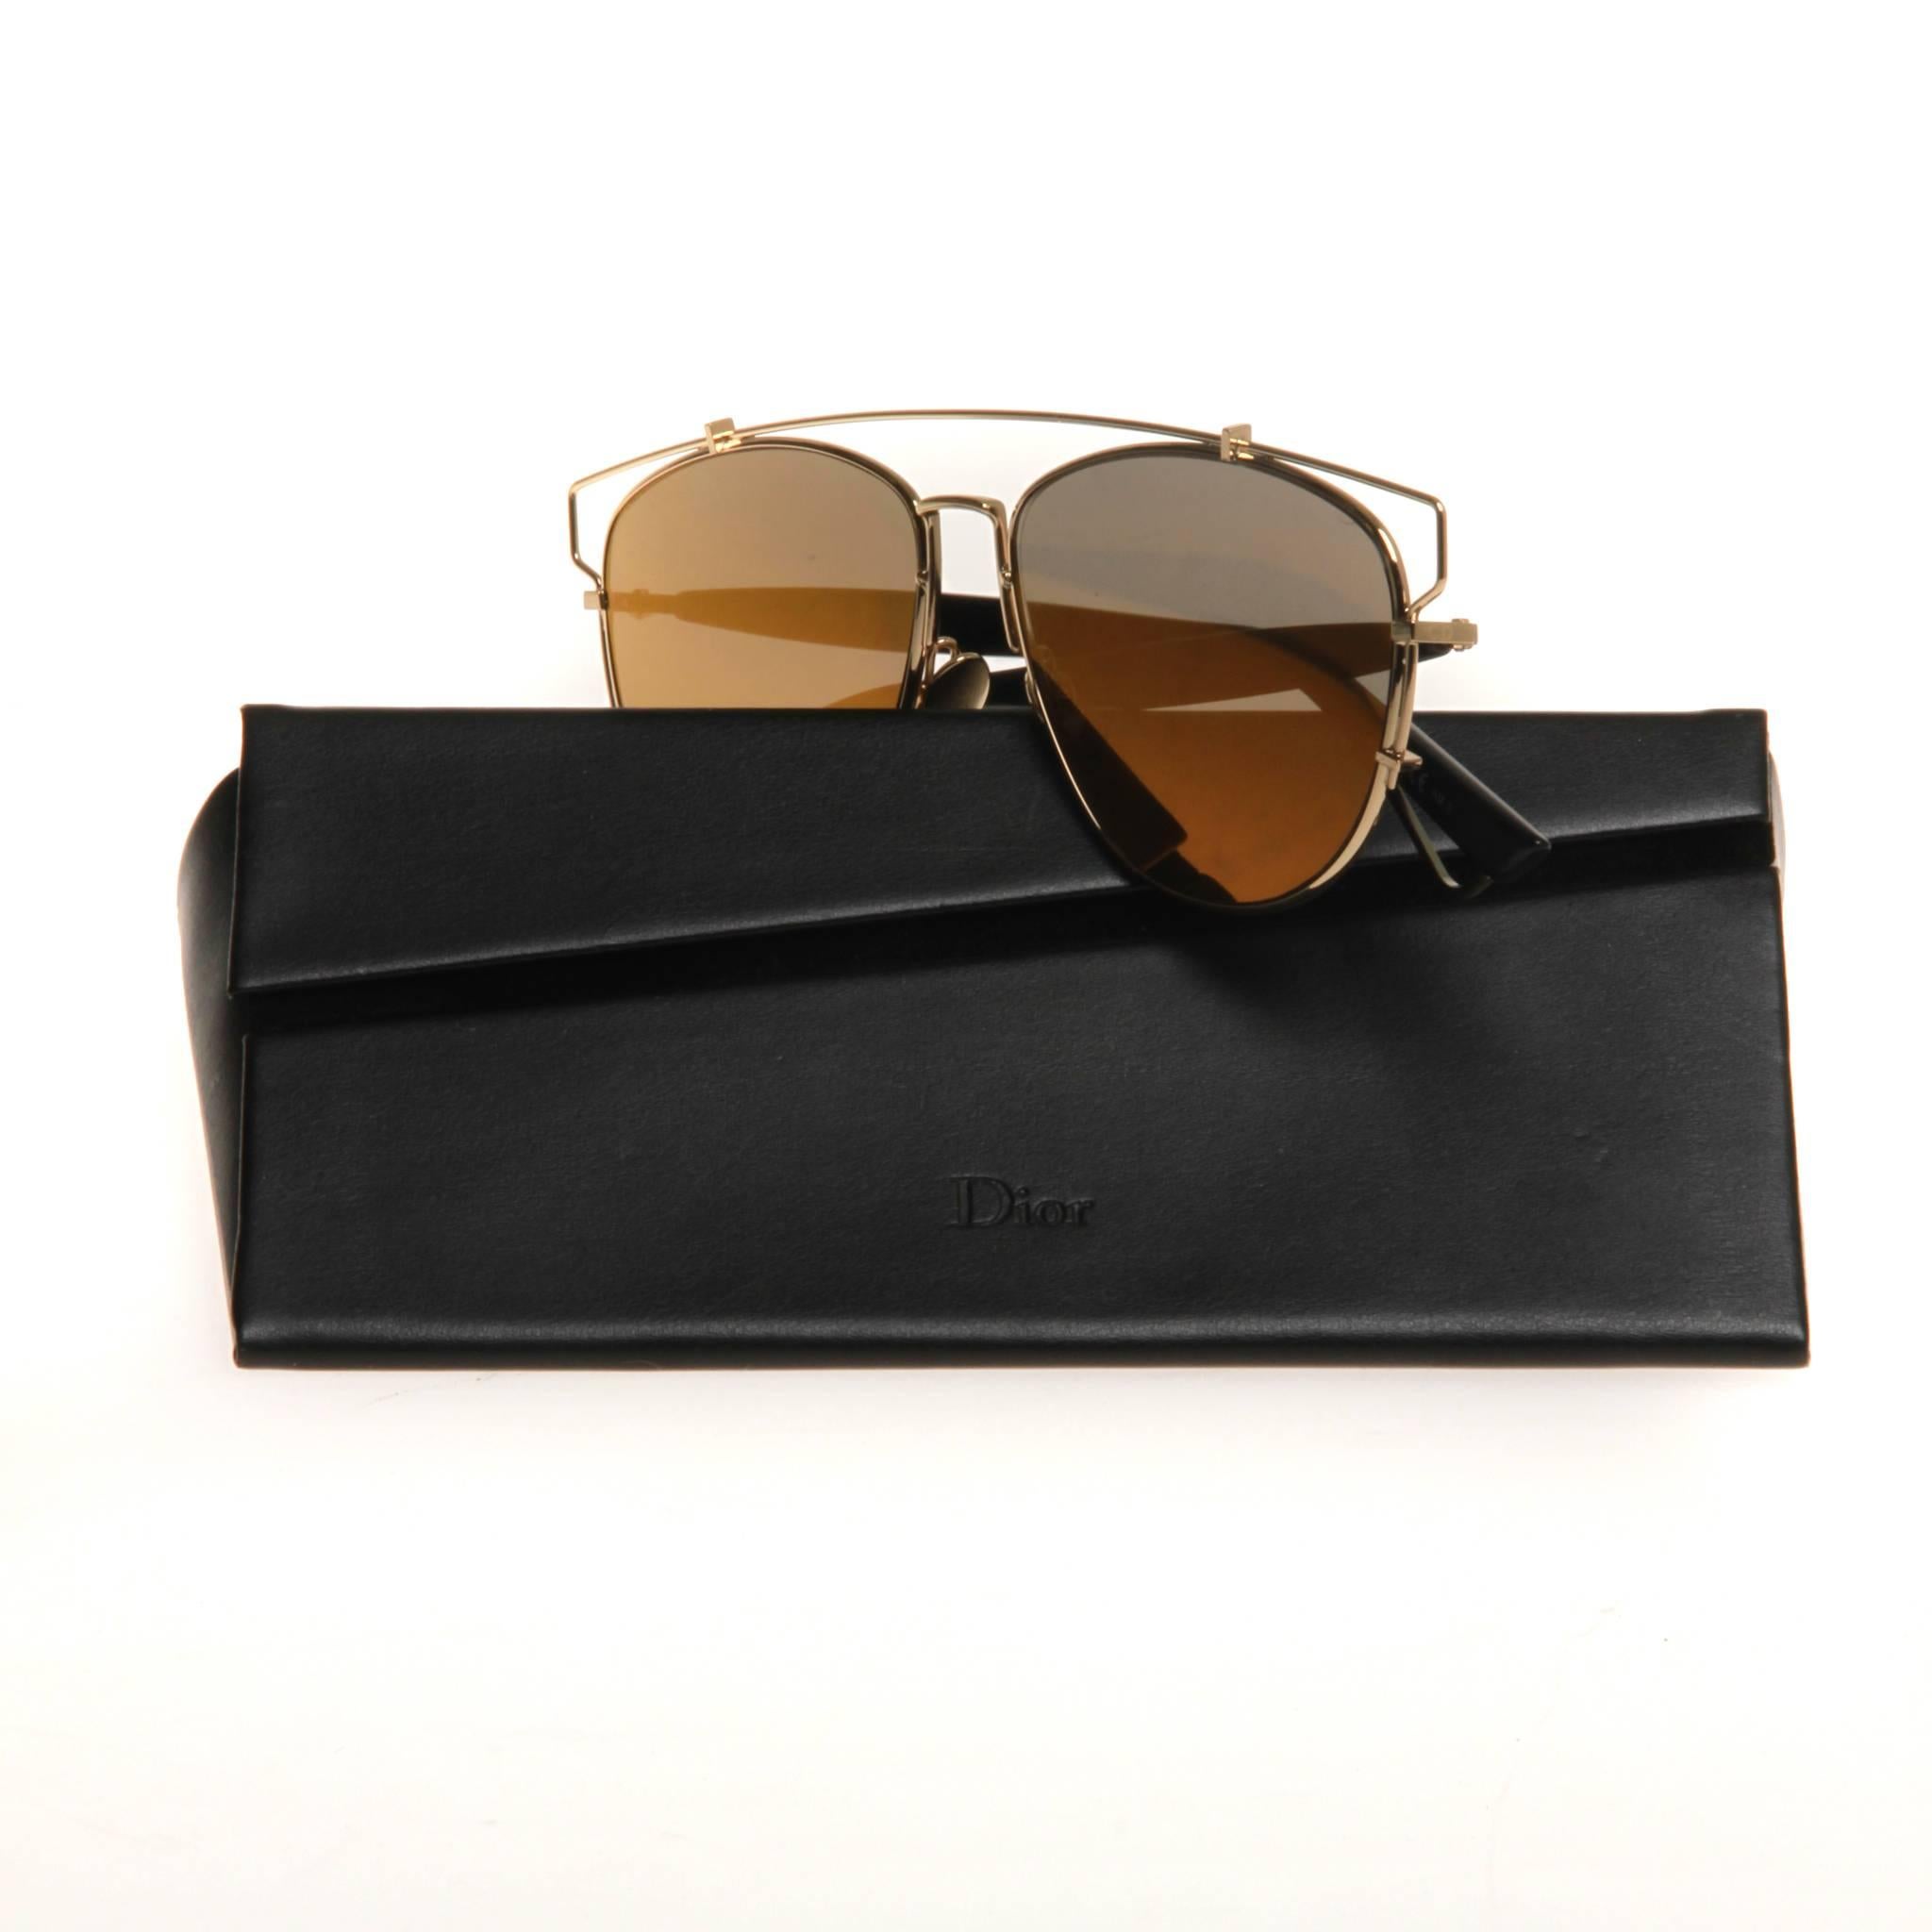 Gold-tone metal Christian Dior Technologic aviator sunglasses with tinted and reflective lenses and logo accents at temples. Includes case. 